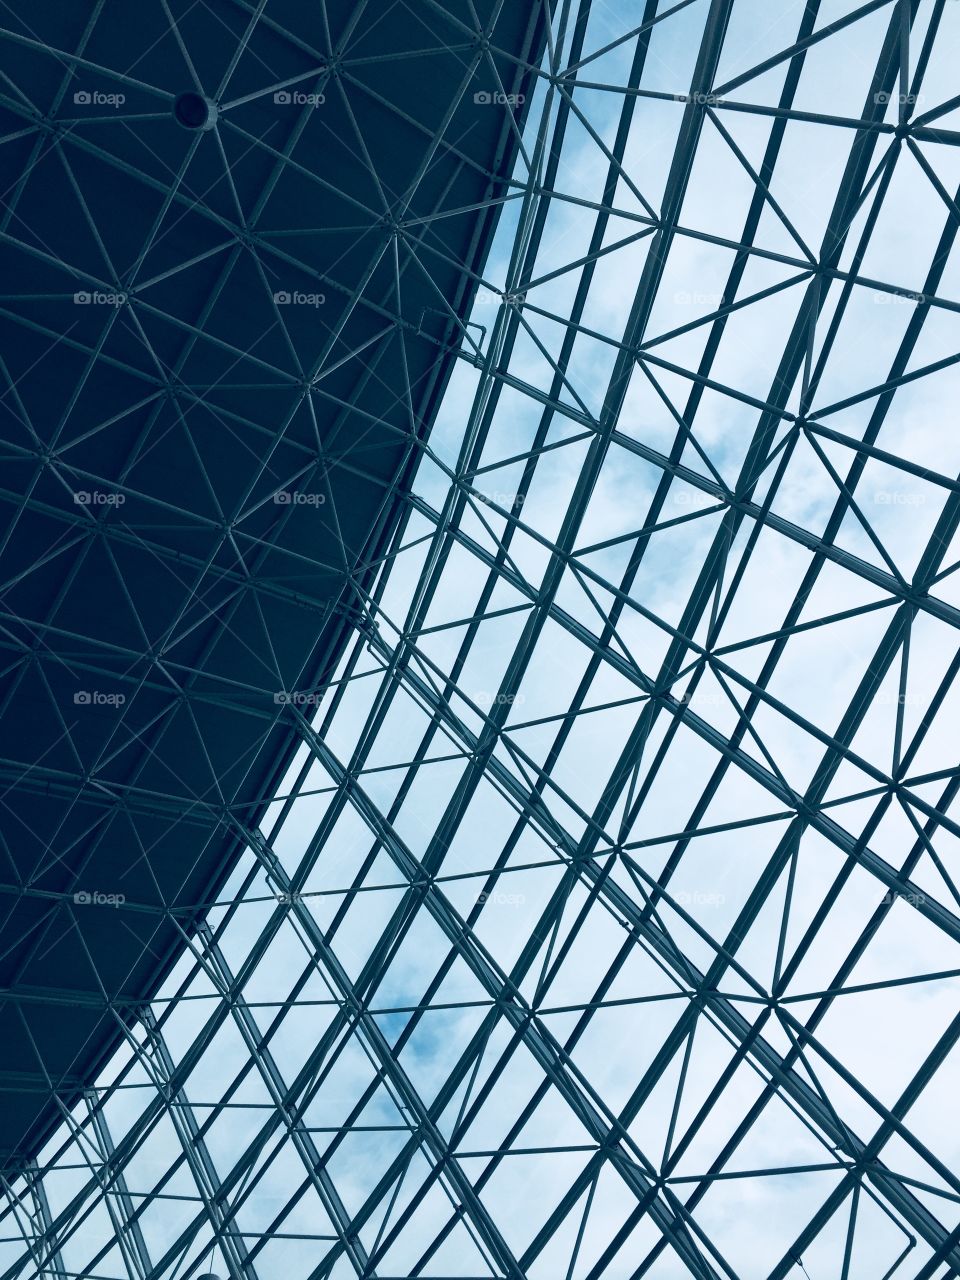 Interior view of a glass and steel structure 